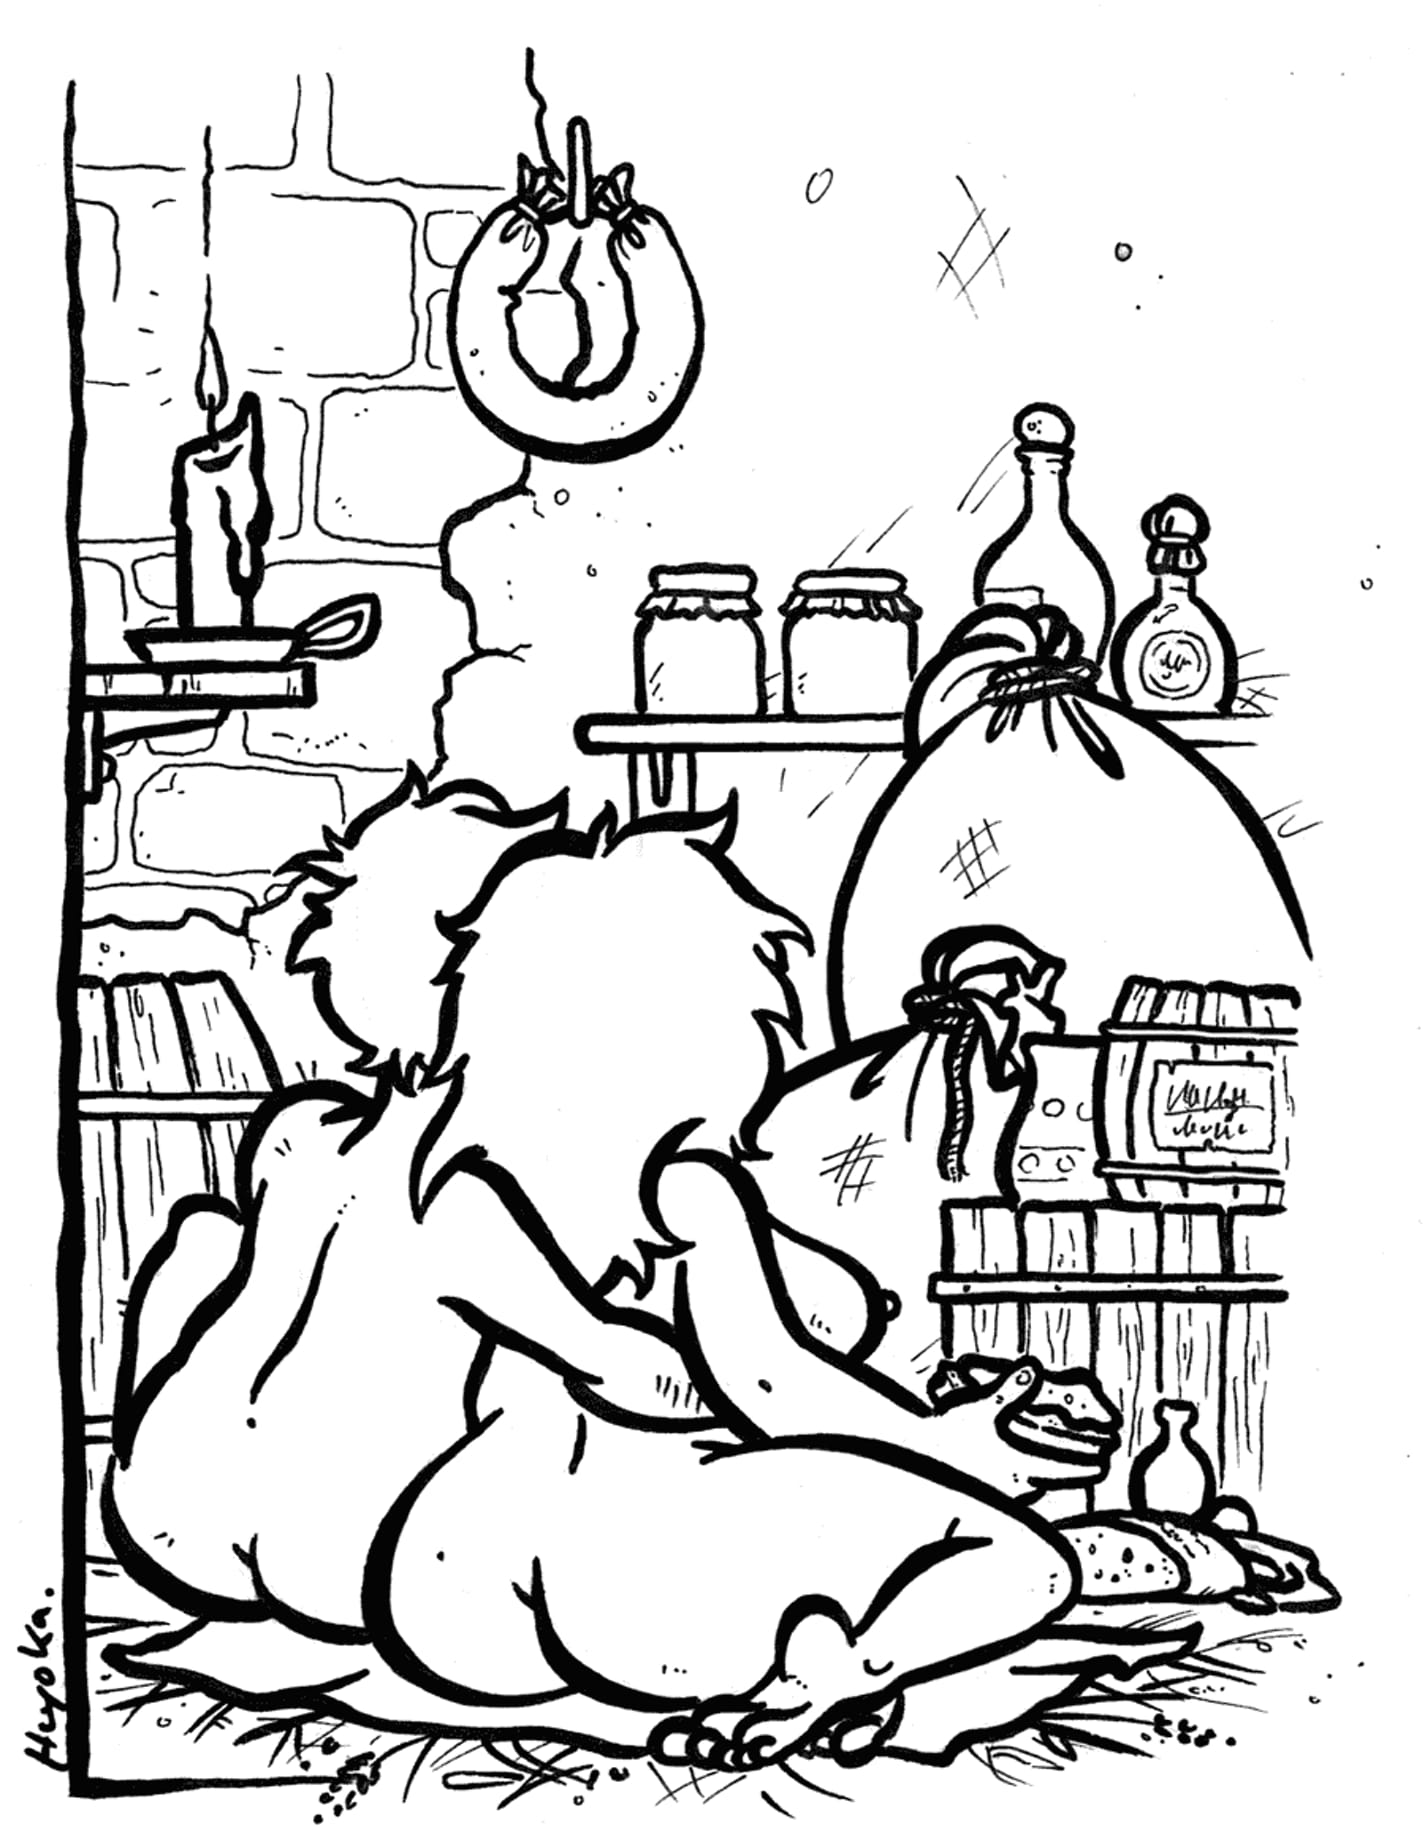 Drawing for a dadaistic pseudo-historic short story – a couple enjoying a rendezvous in the larder.